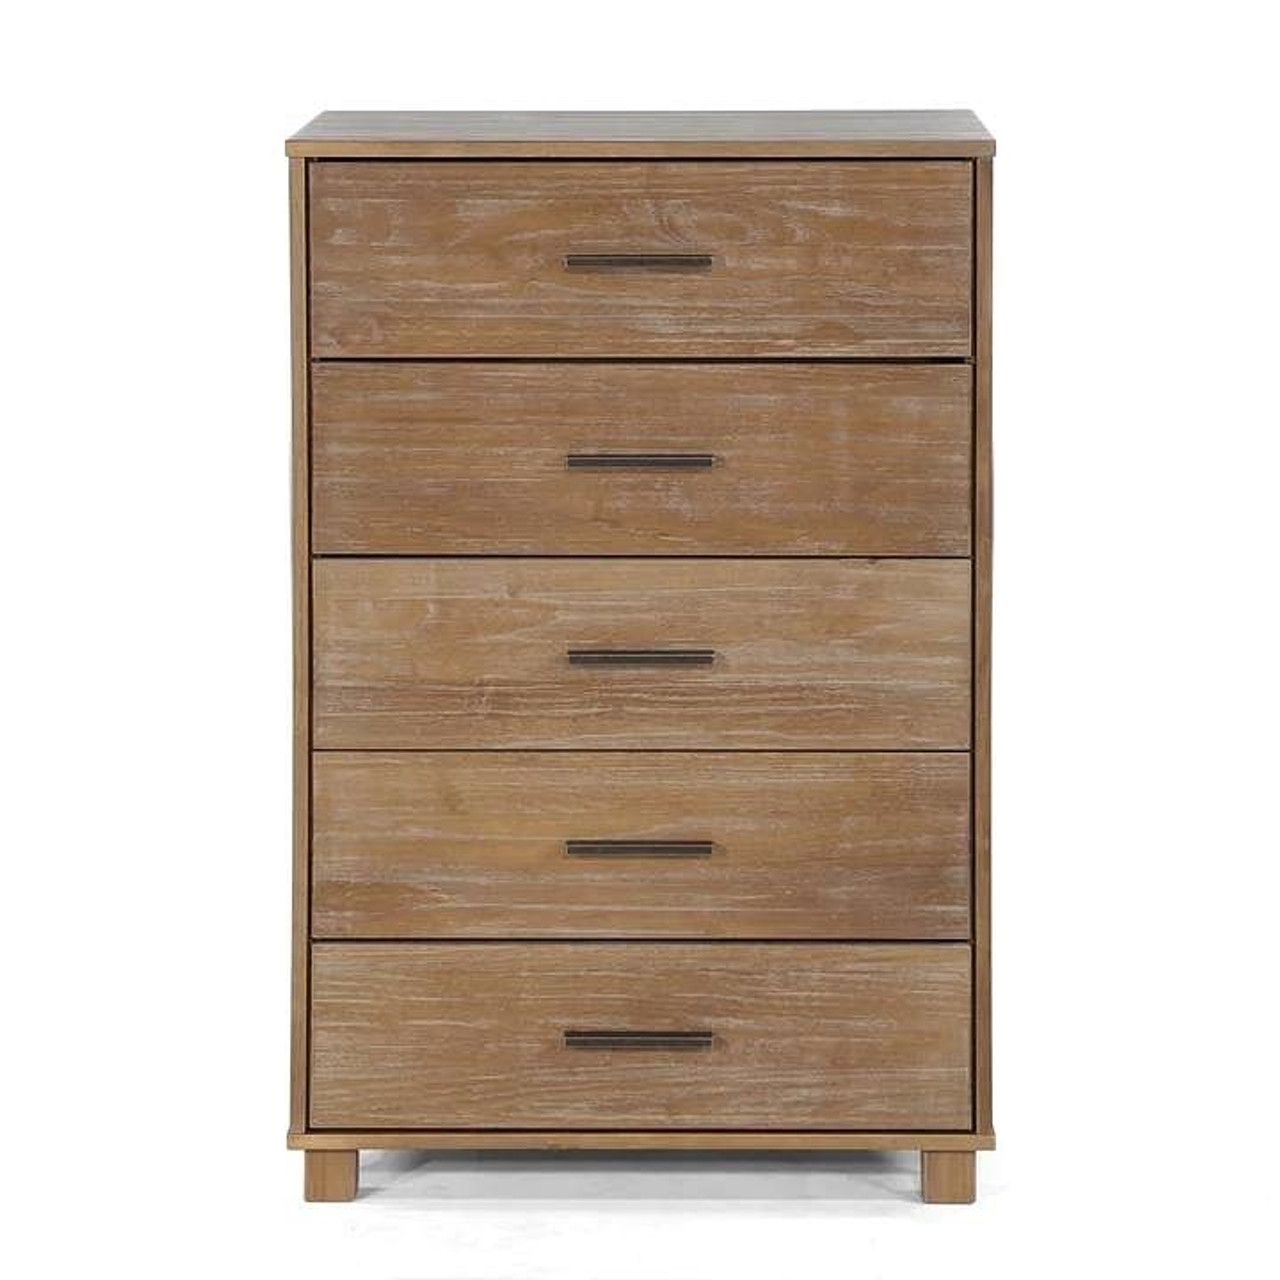 Modern Farmhouse Solid Wood 5 Drawer Bedroom Chest in Pine Finish